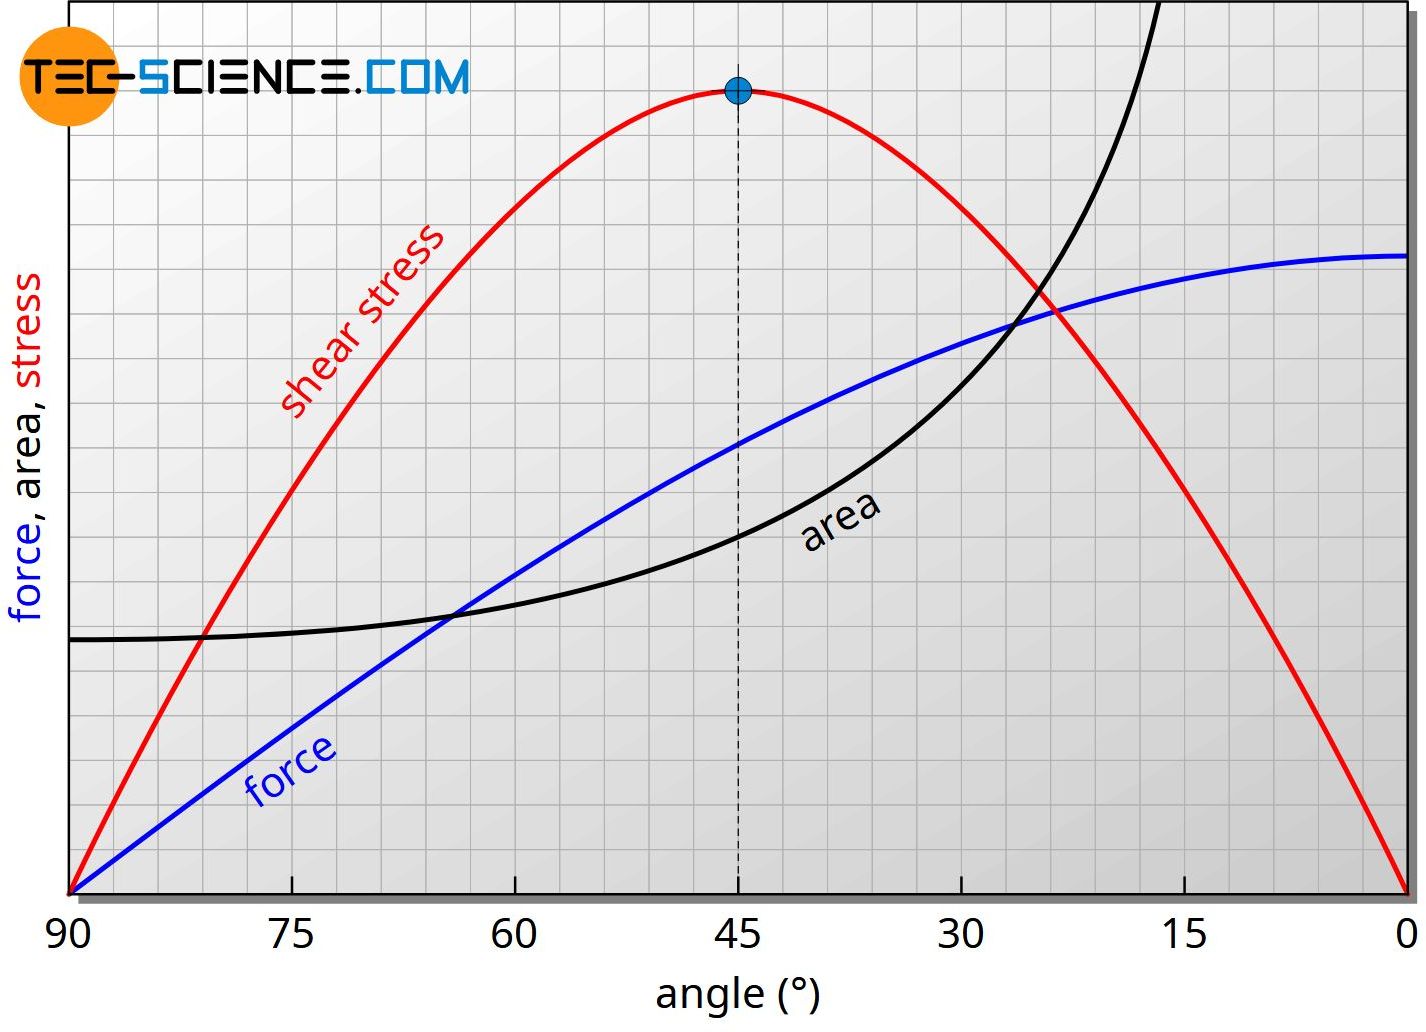 Shear stress as a function of the angle